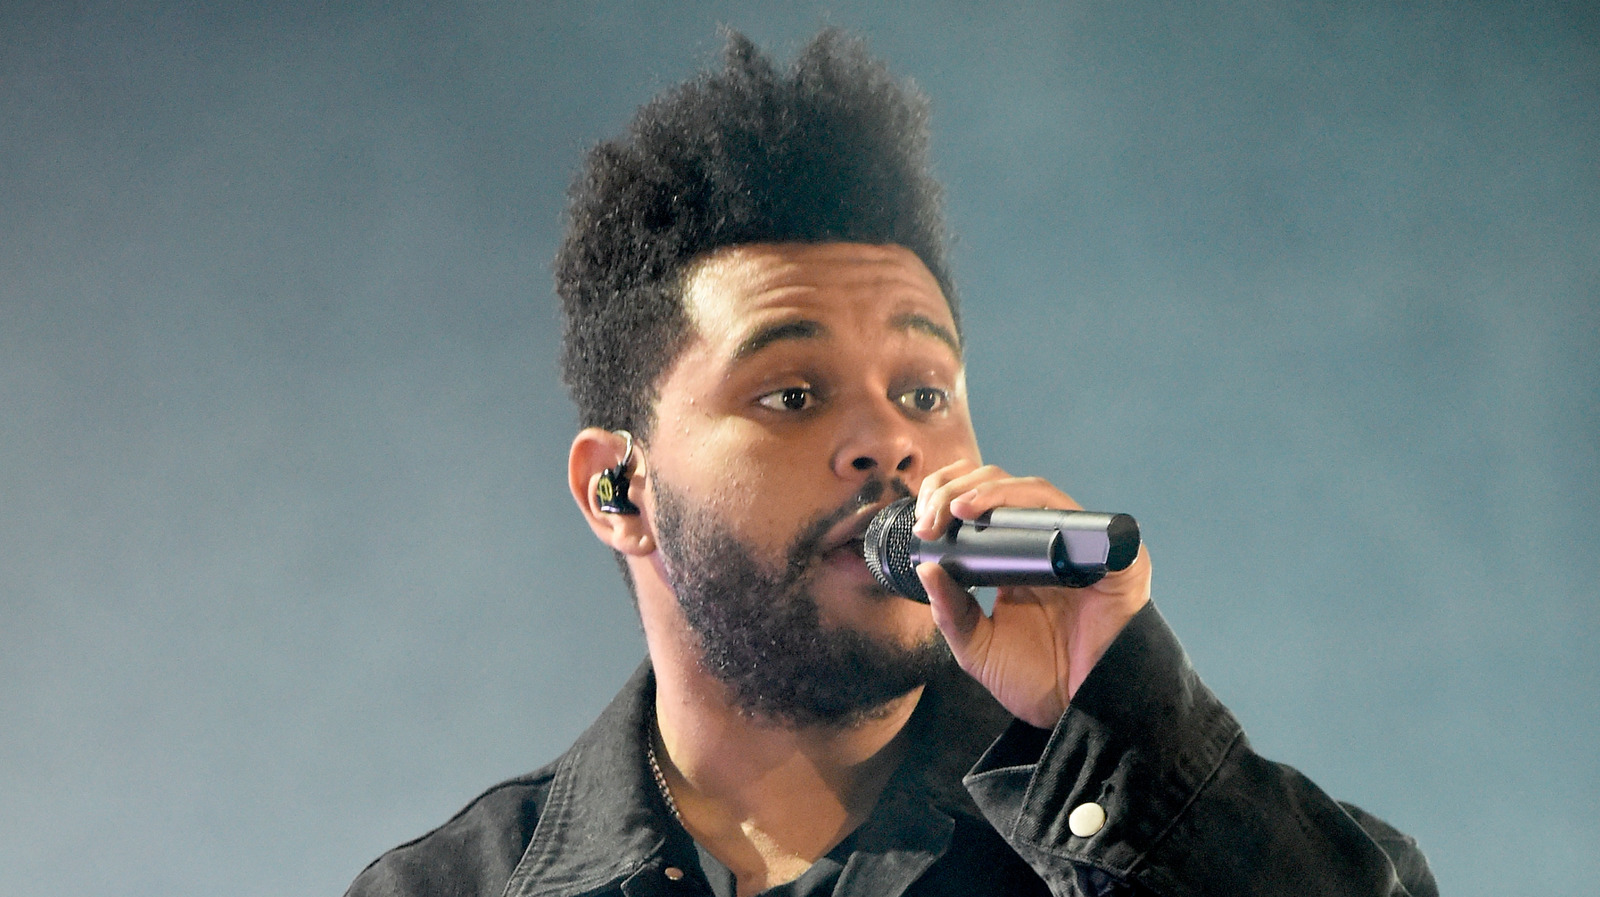 The Weeknd's Earned It Lyrics Describe 'Fifty Shades Of Grey